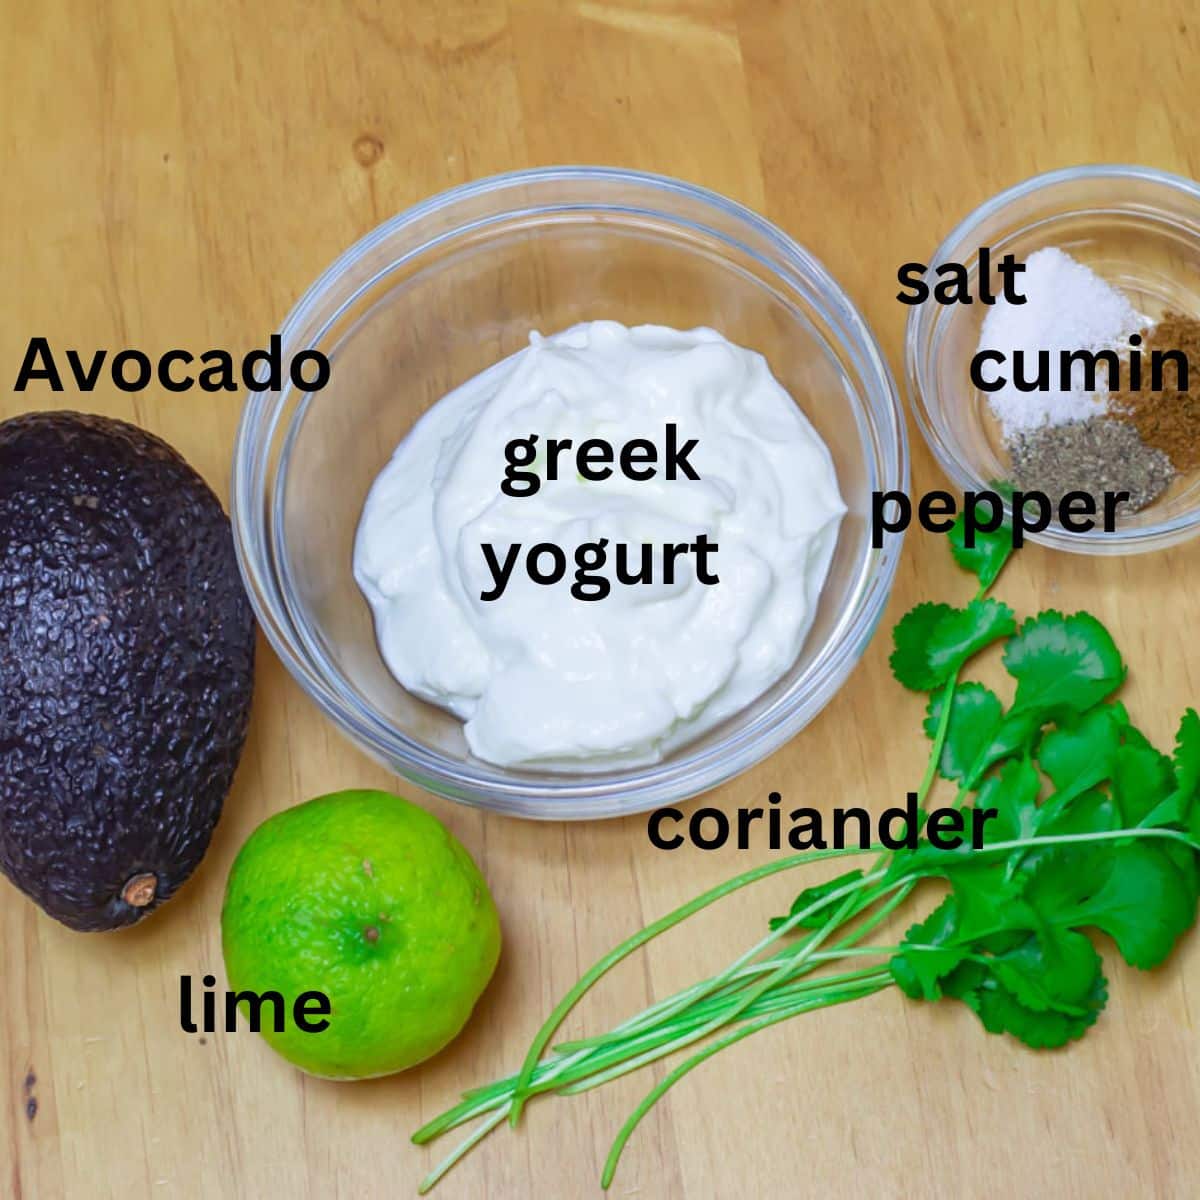 yogurt, coriander, avocado, lime and seasoning placed on a wooden table.